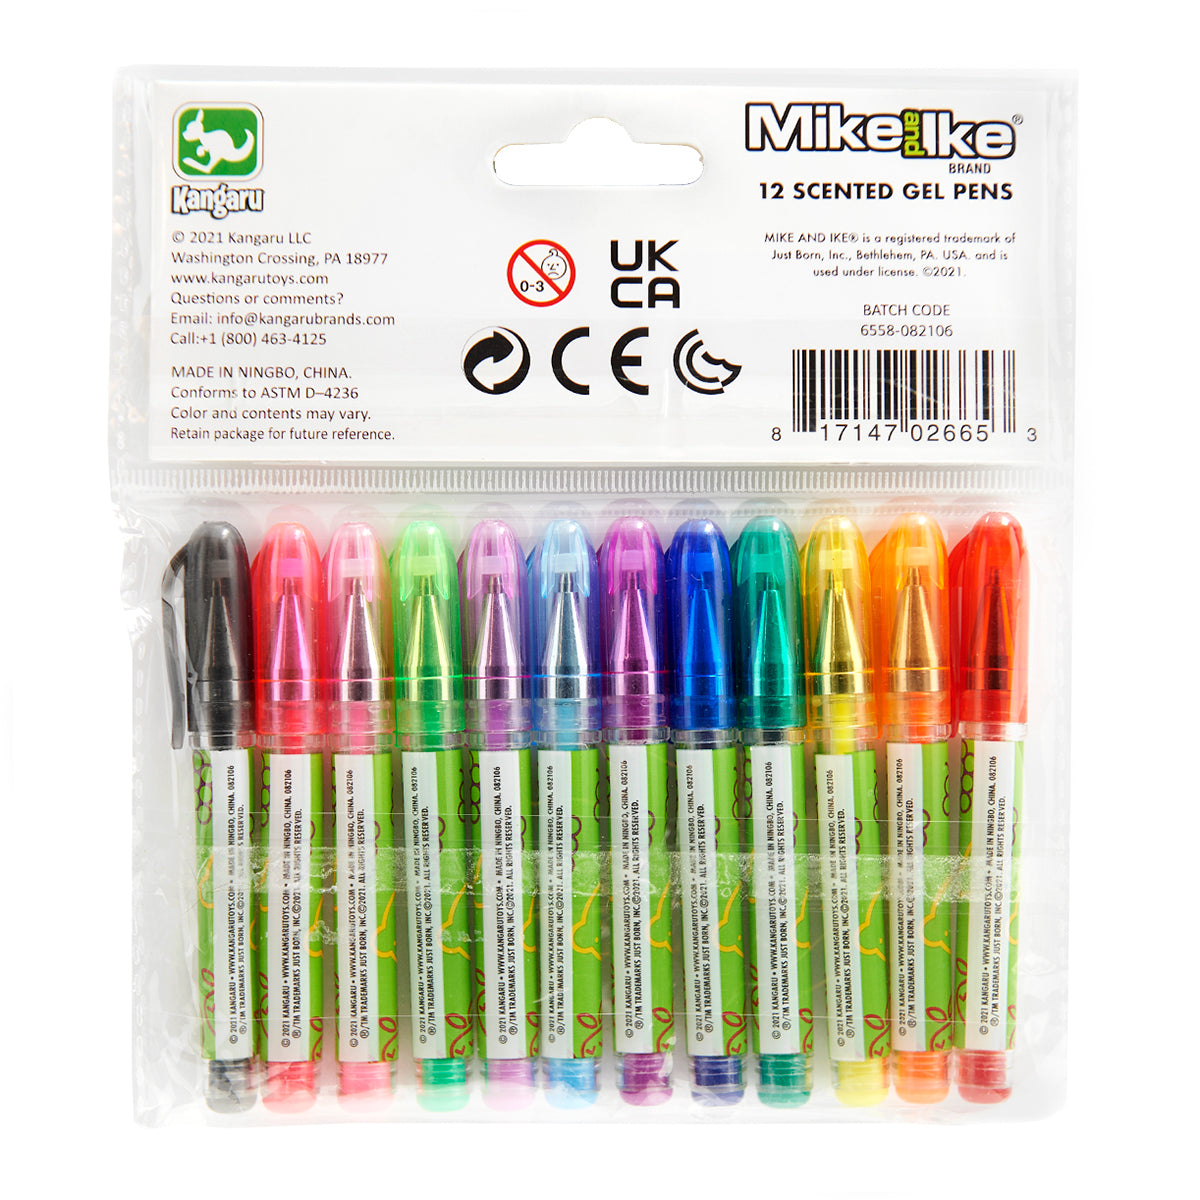 Scented Glitter Gel Pens at Lakeshore Learning